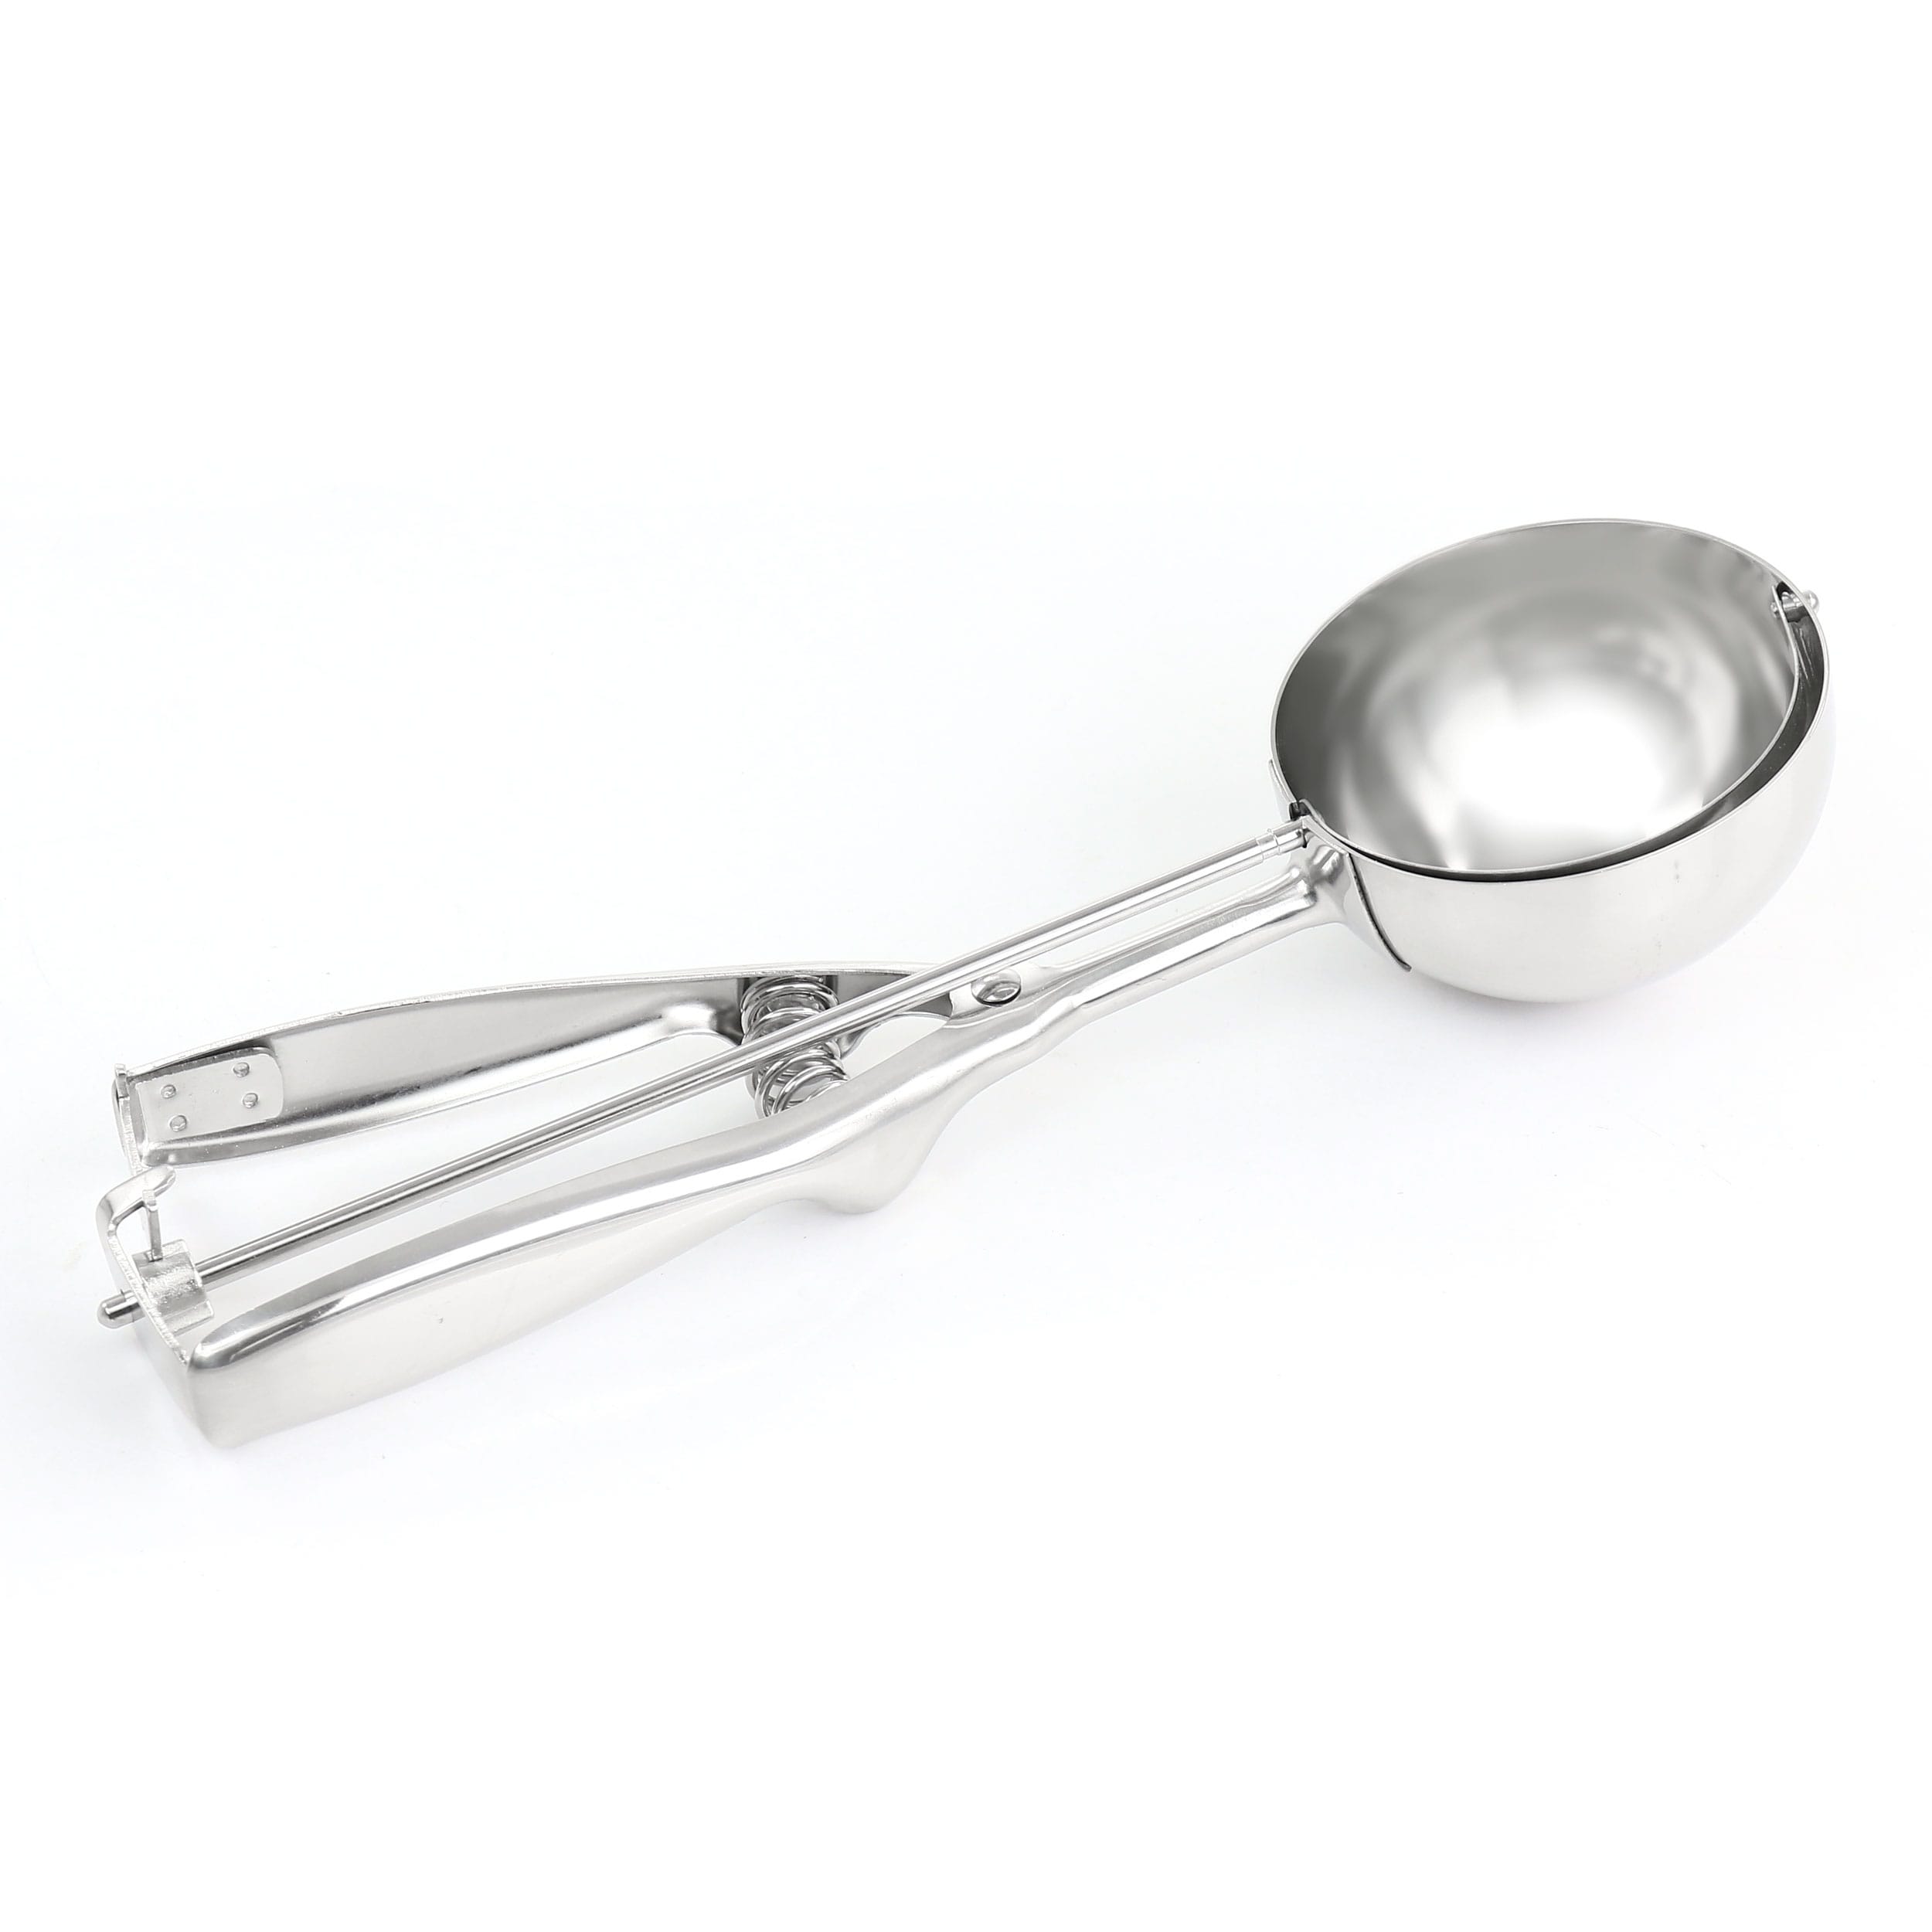 https://ak1.ostkcdn.com/images/products/is/images/direct/259a65dd3835e552a2065af79878edd14539f11f/Marth-Stewart-Stainless-Steel-Kitchen-Scoop.jpg